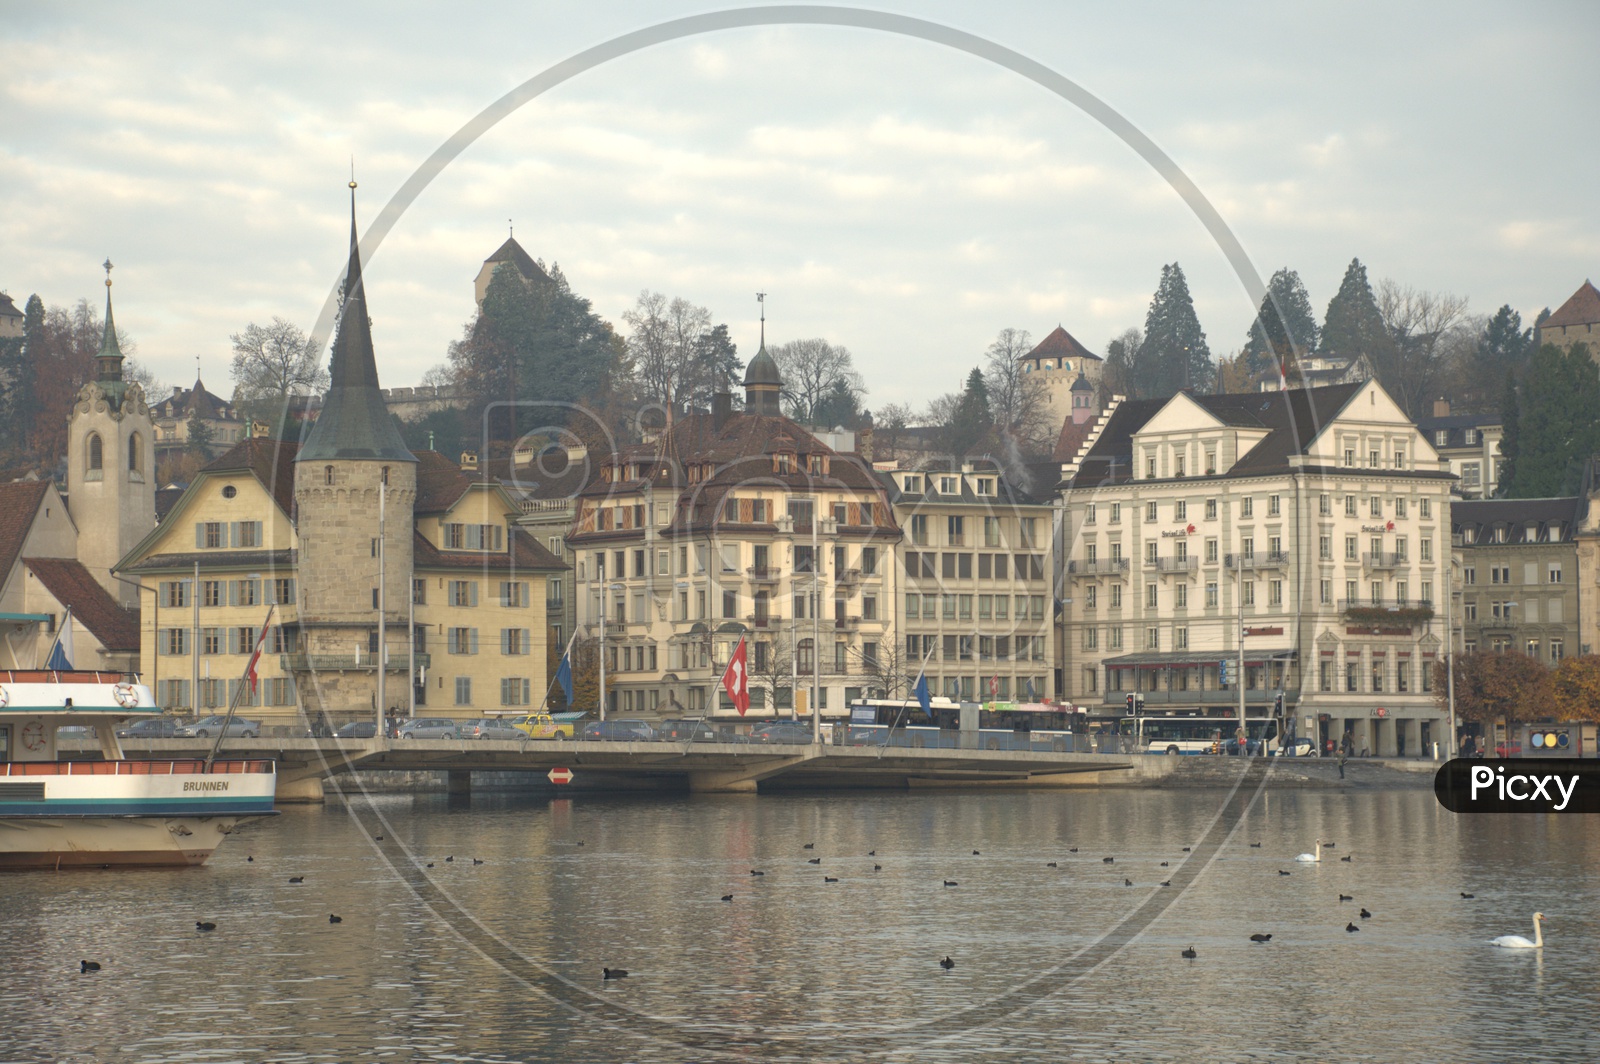 View of Lucerne